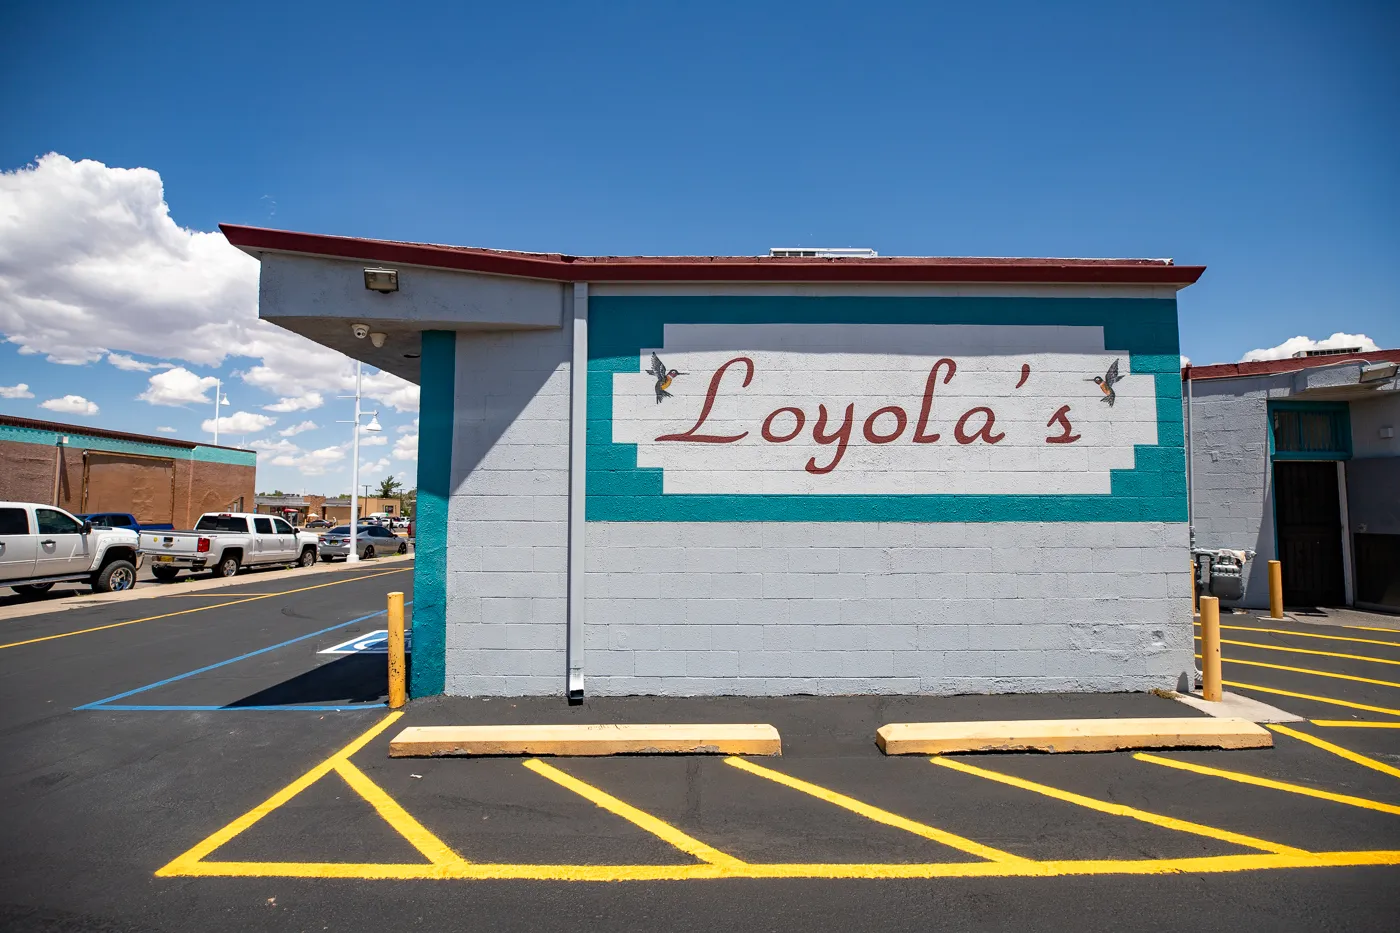 Loyola's Family Restaurant in Albuquerque, New Mexico Route 66 Restaurant and Breaking Bad Filming Location